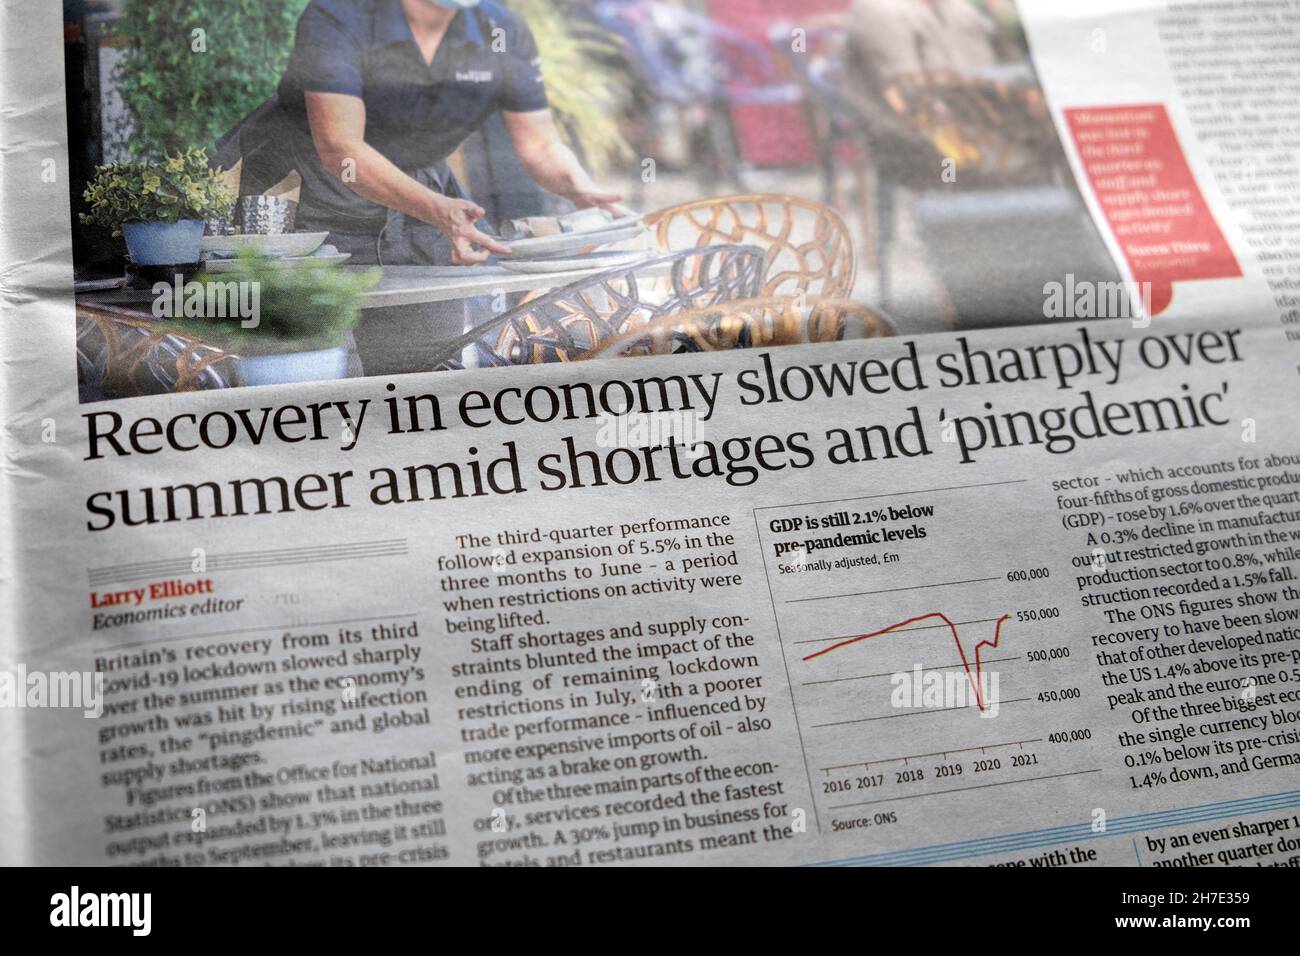 'Recovery in economy slowed sharply over summer amid shortages and 'pingdemic' Guardian newspaper headline covid 19 article 12 November 2021 London UK Stock Photo